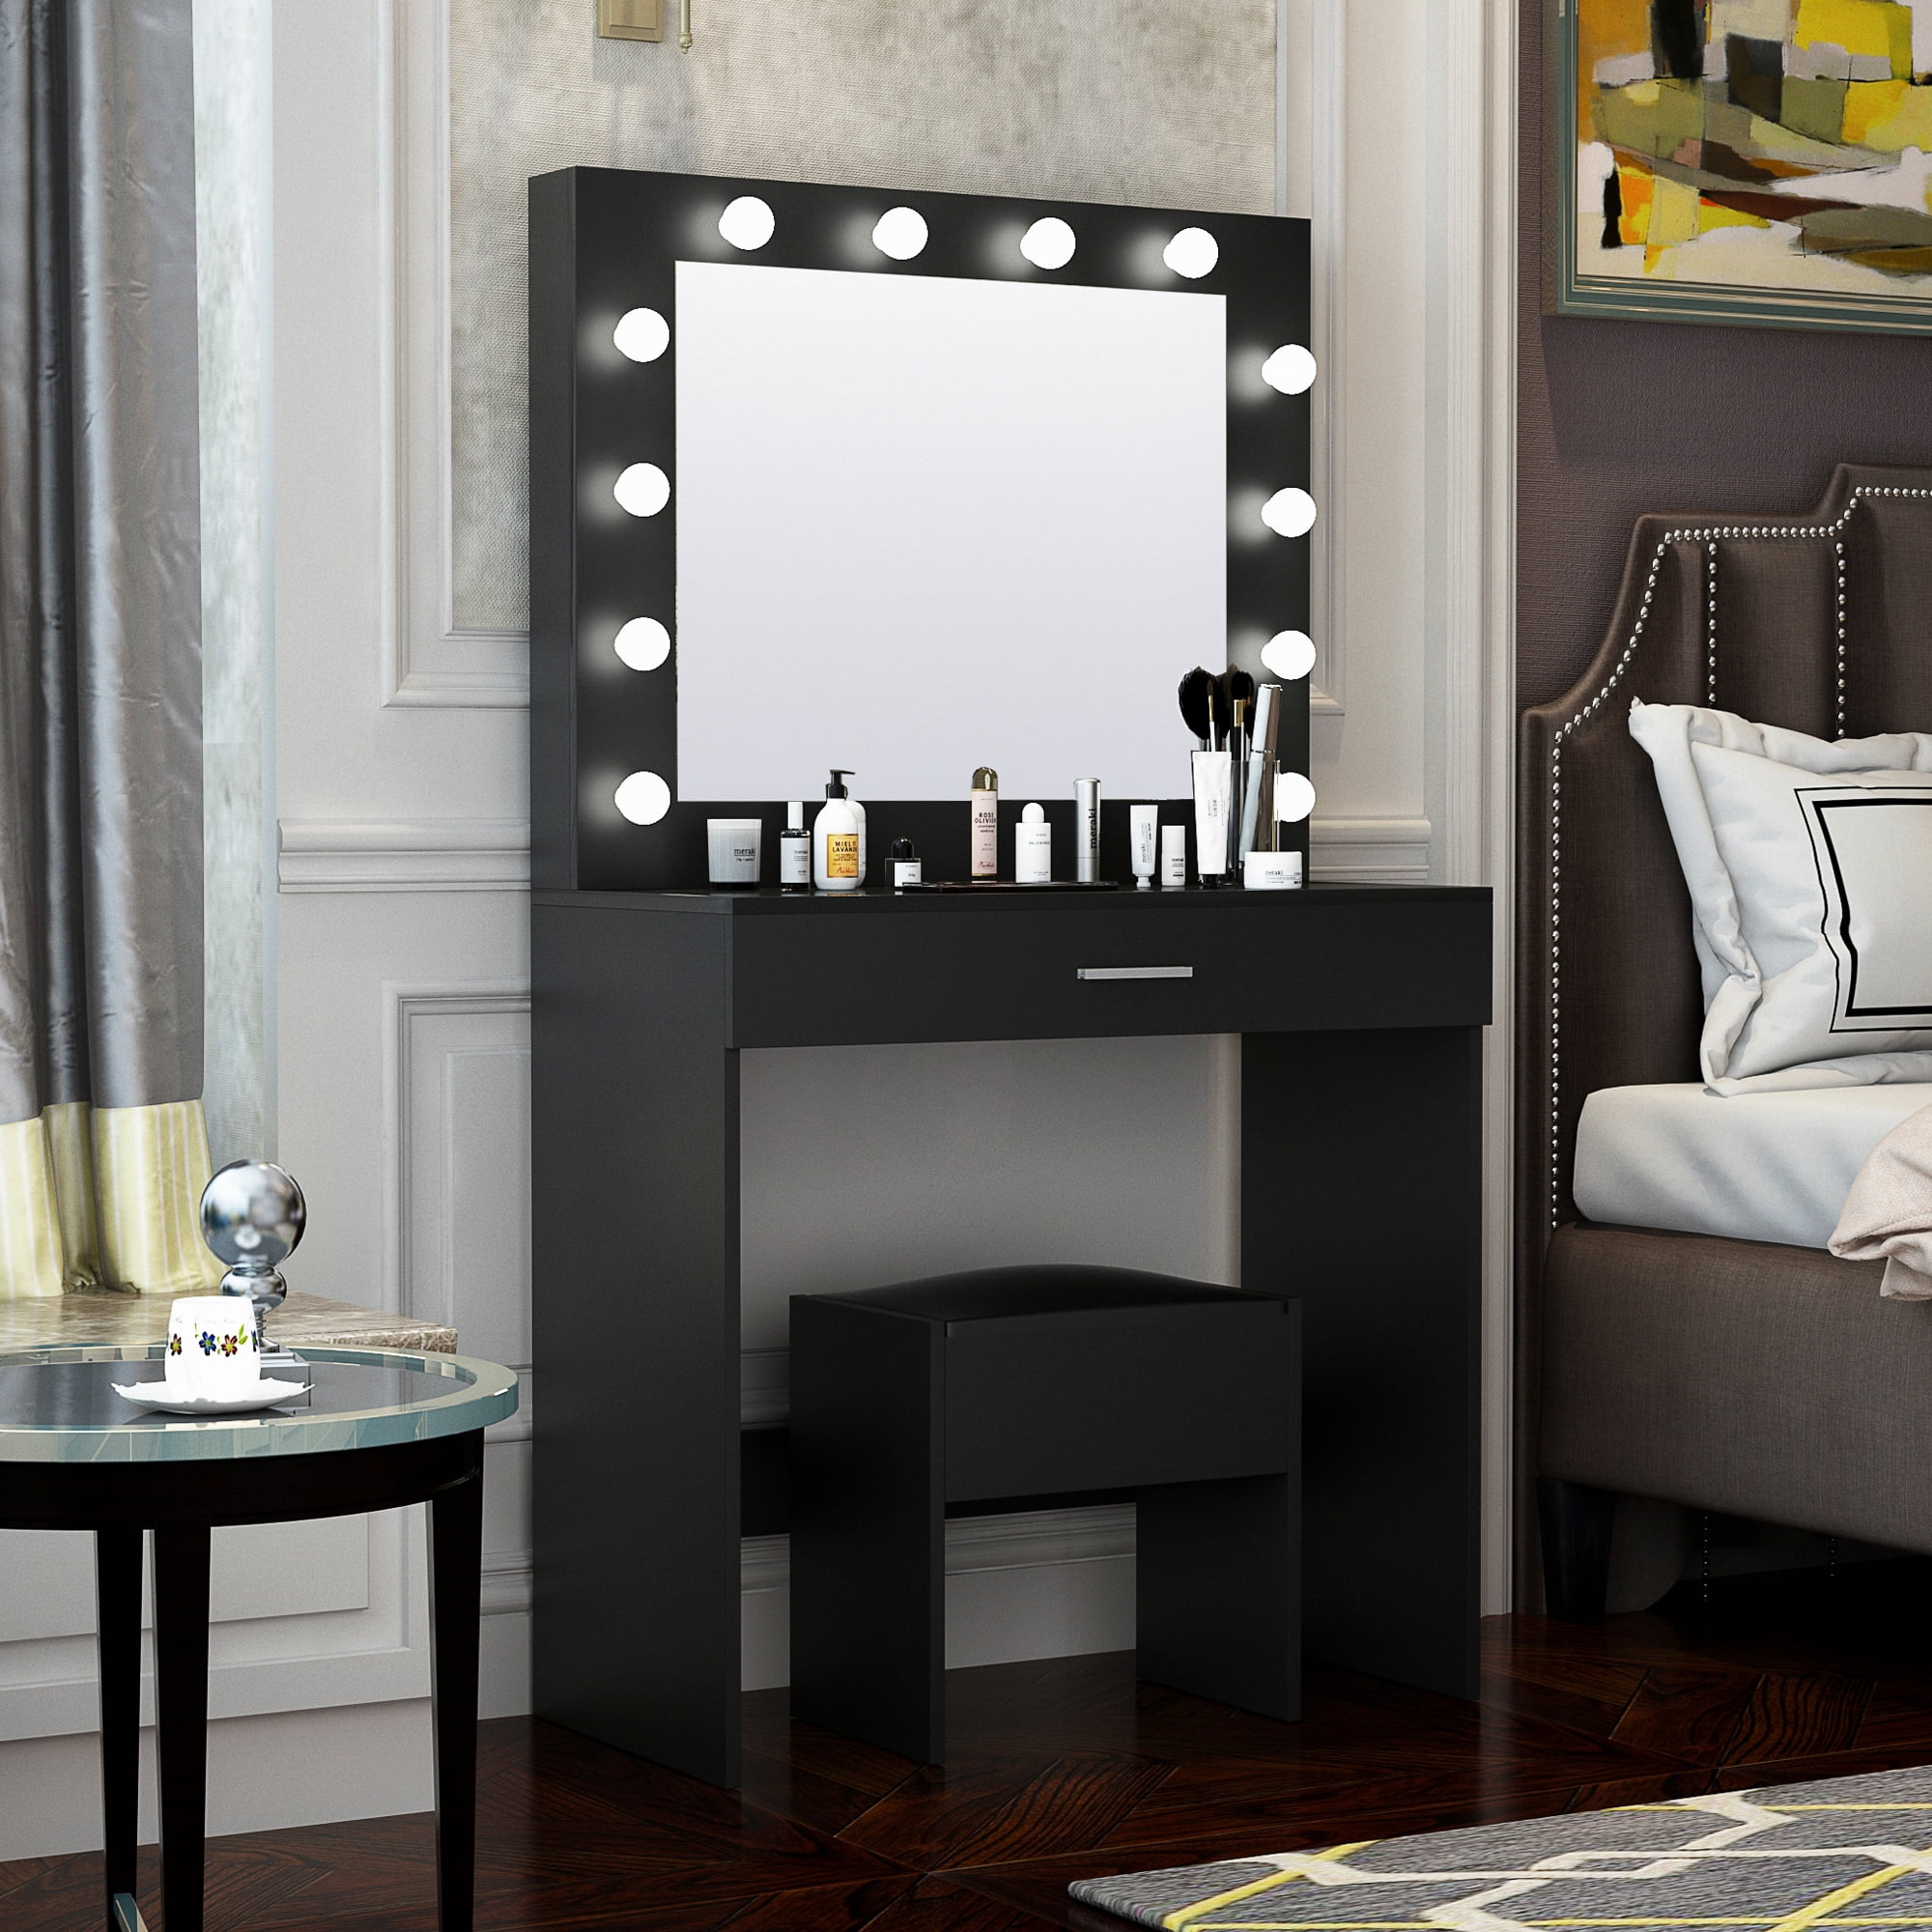 Modern Girl Style Bedroom Dressing Table with Drawers and Dressing Tables 1 Drawer,1 Drawer 